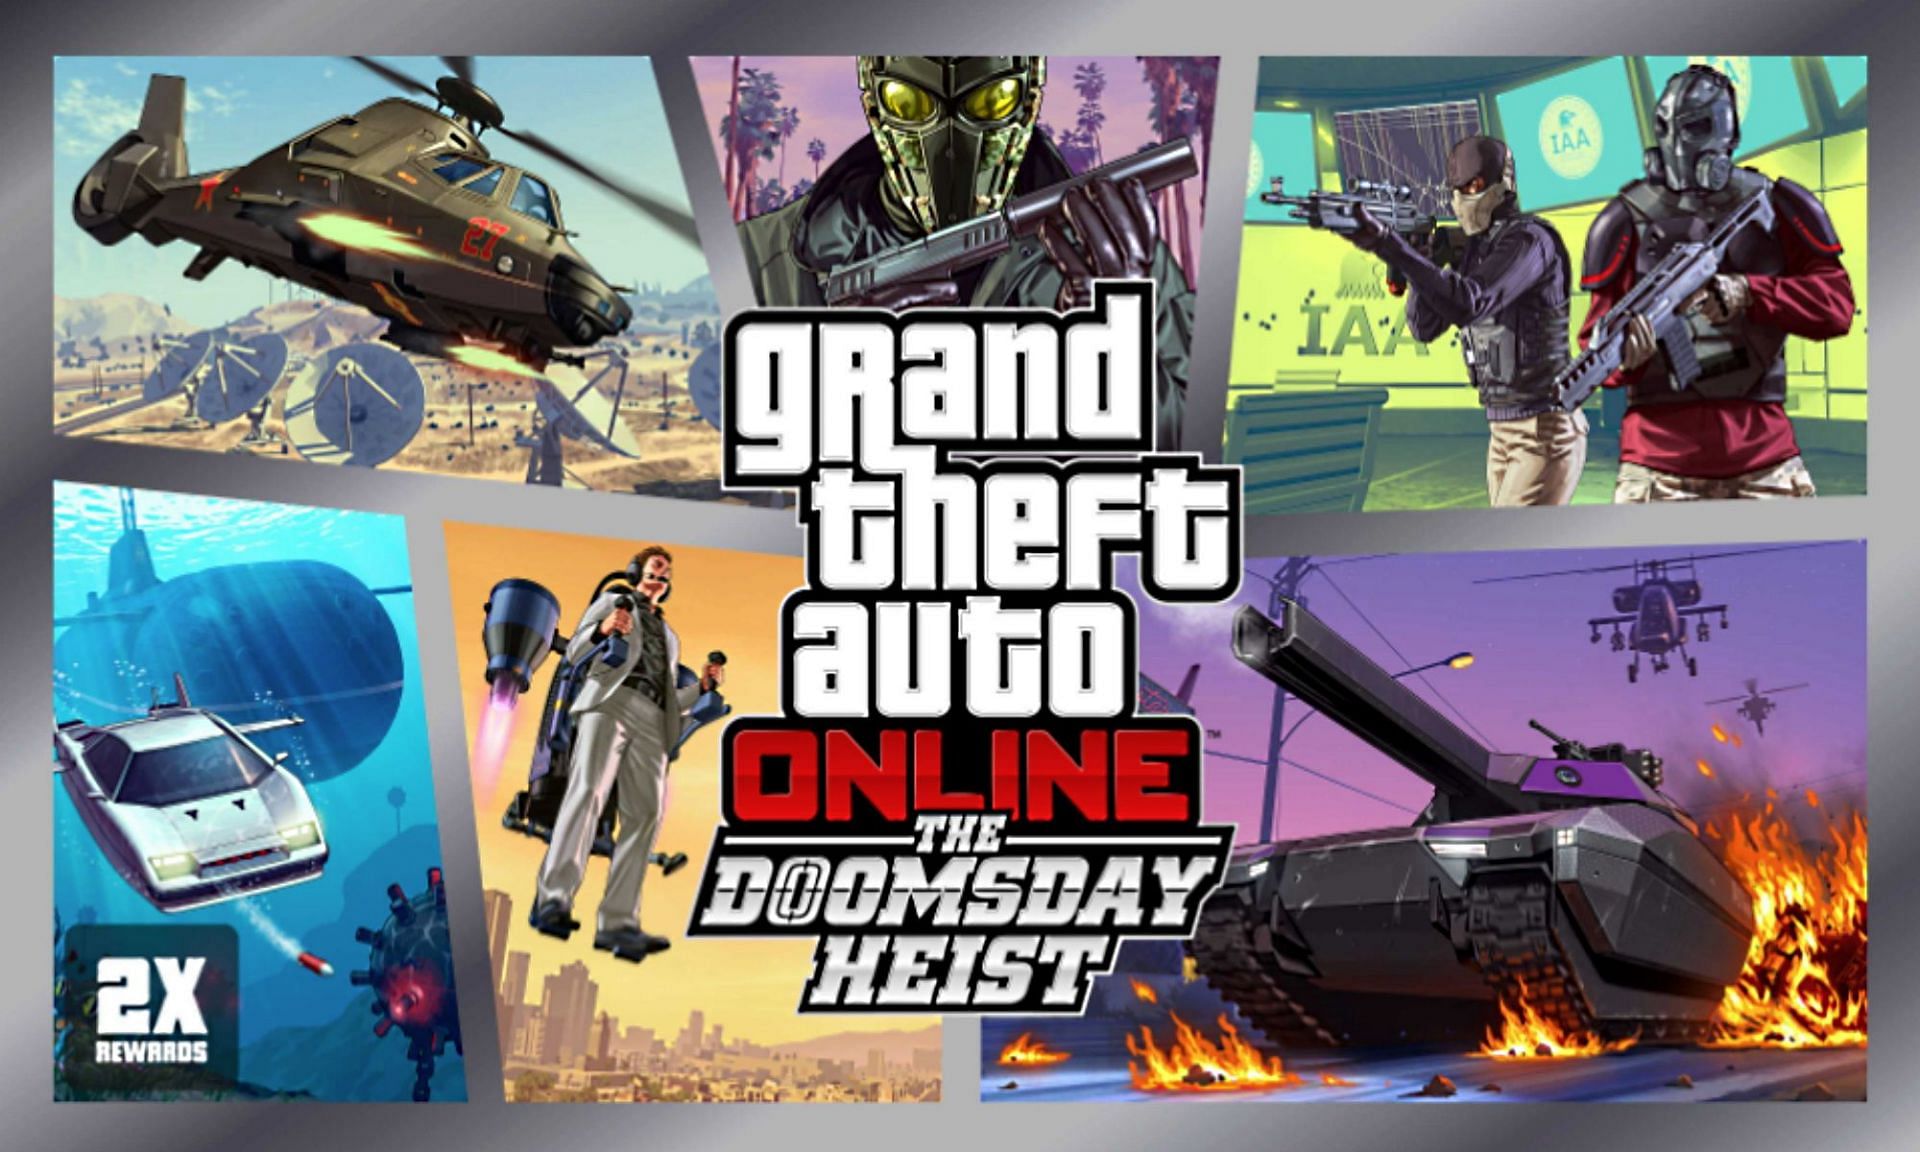 GTA Online players will have to save Los Santos once again (Image via Rockstar Games)